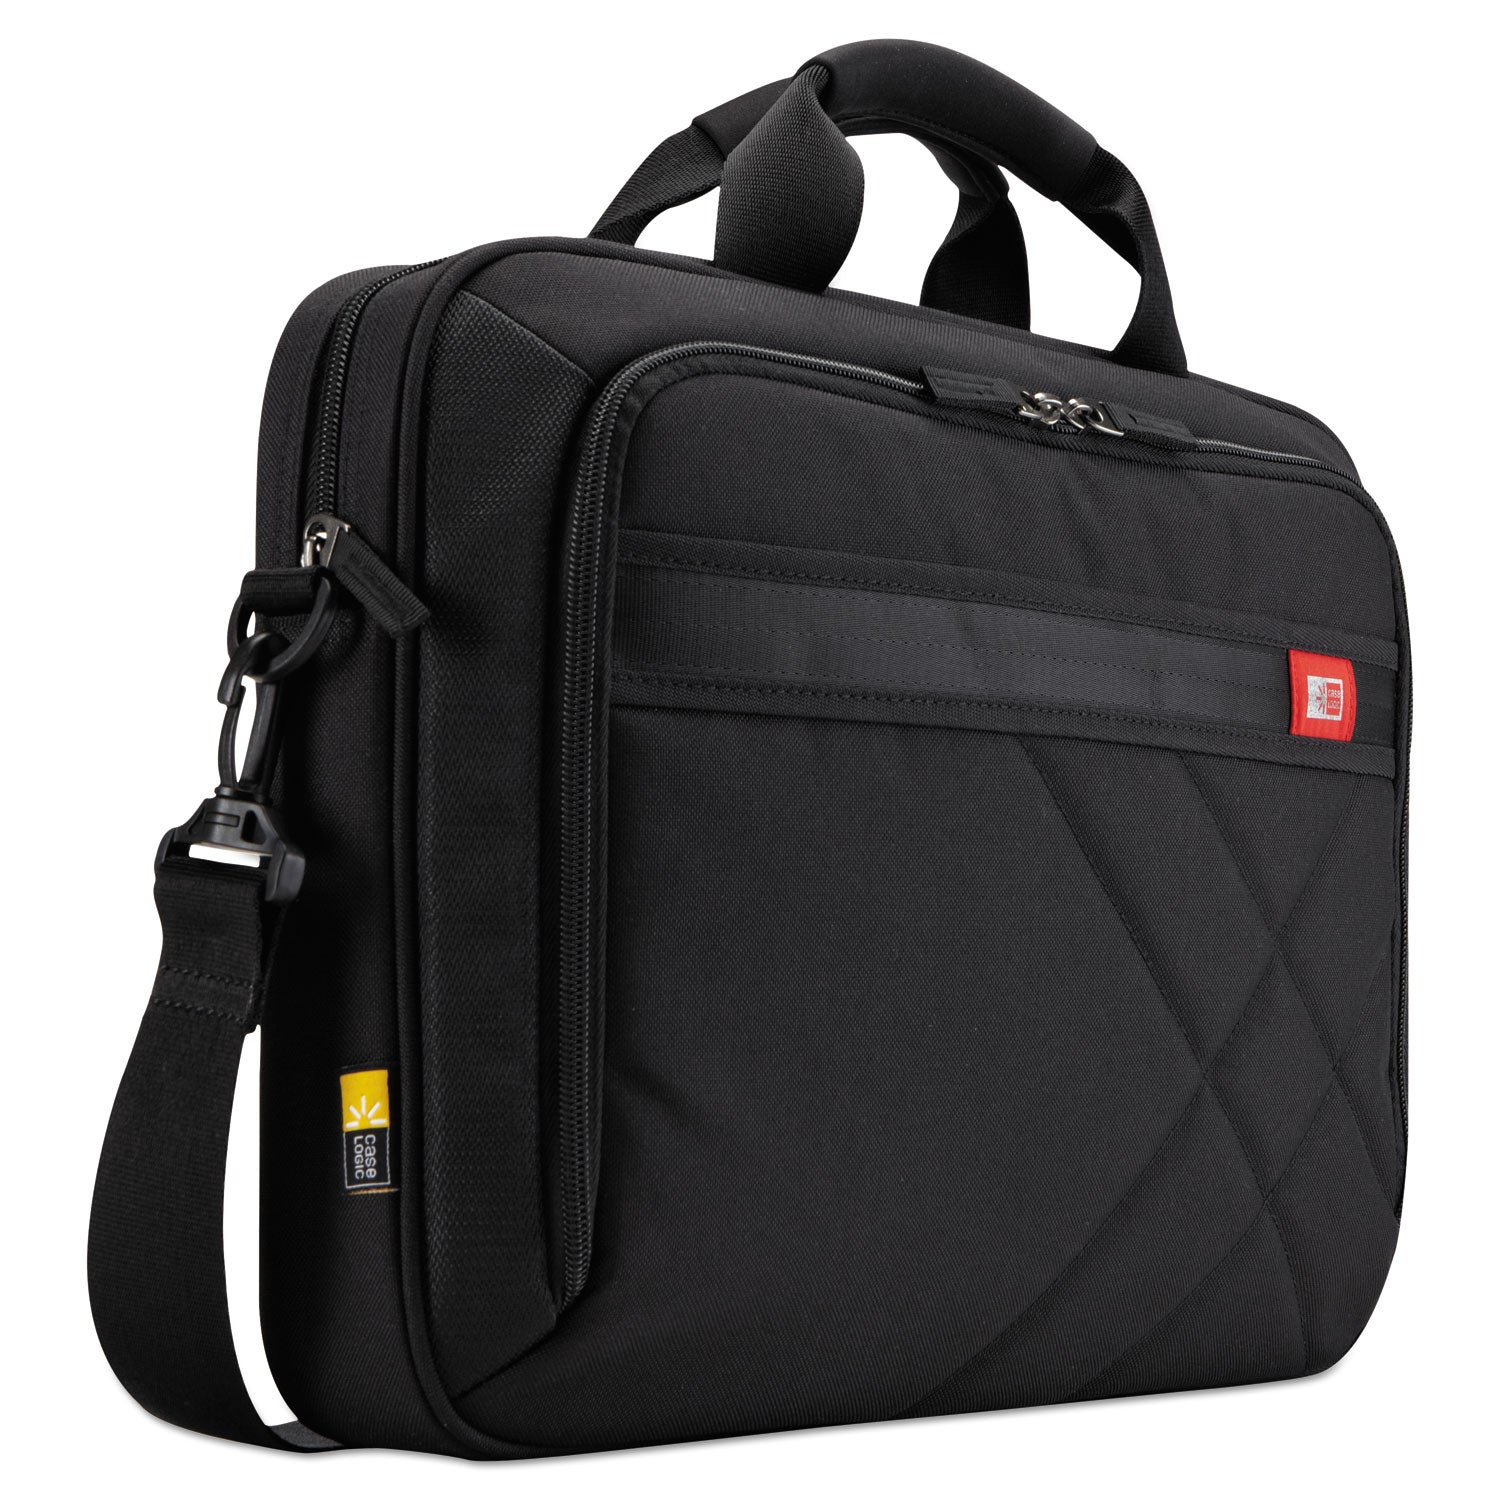 diamond-briefcase-fits-devices-up-to-156-polyester-161-x-31-x-114-black_clg3201433 - 1